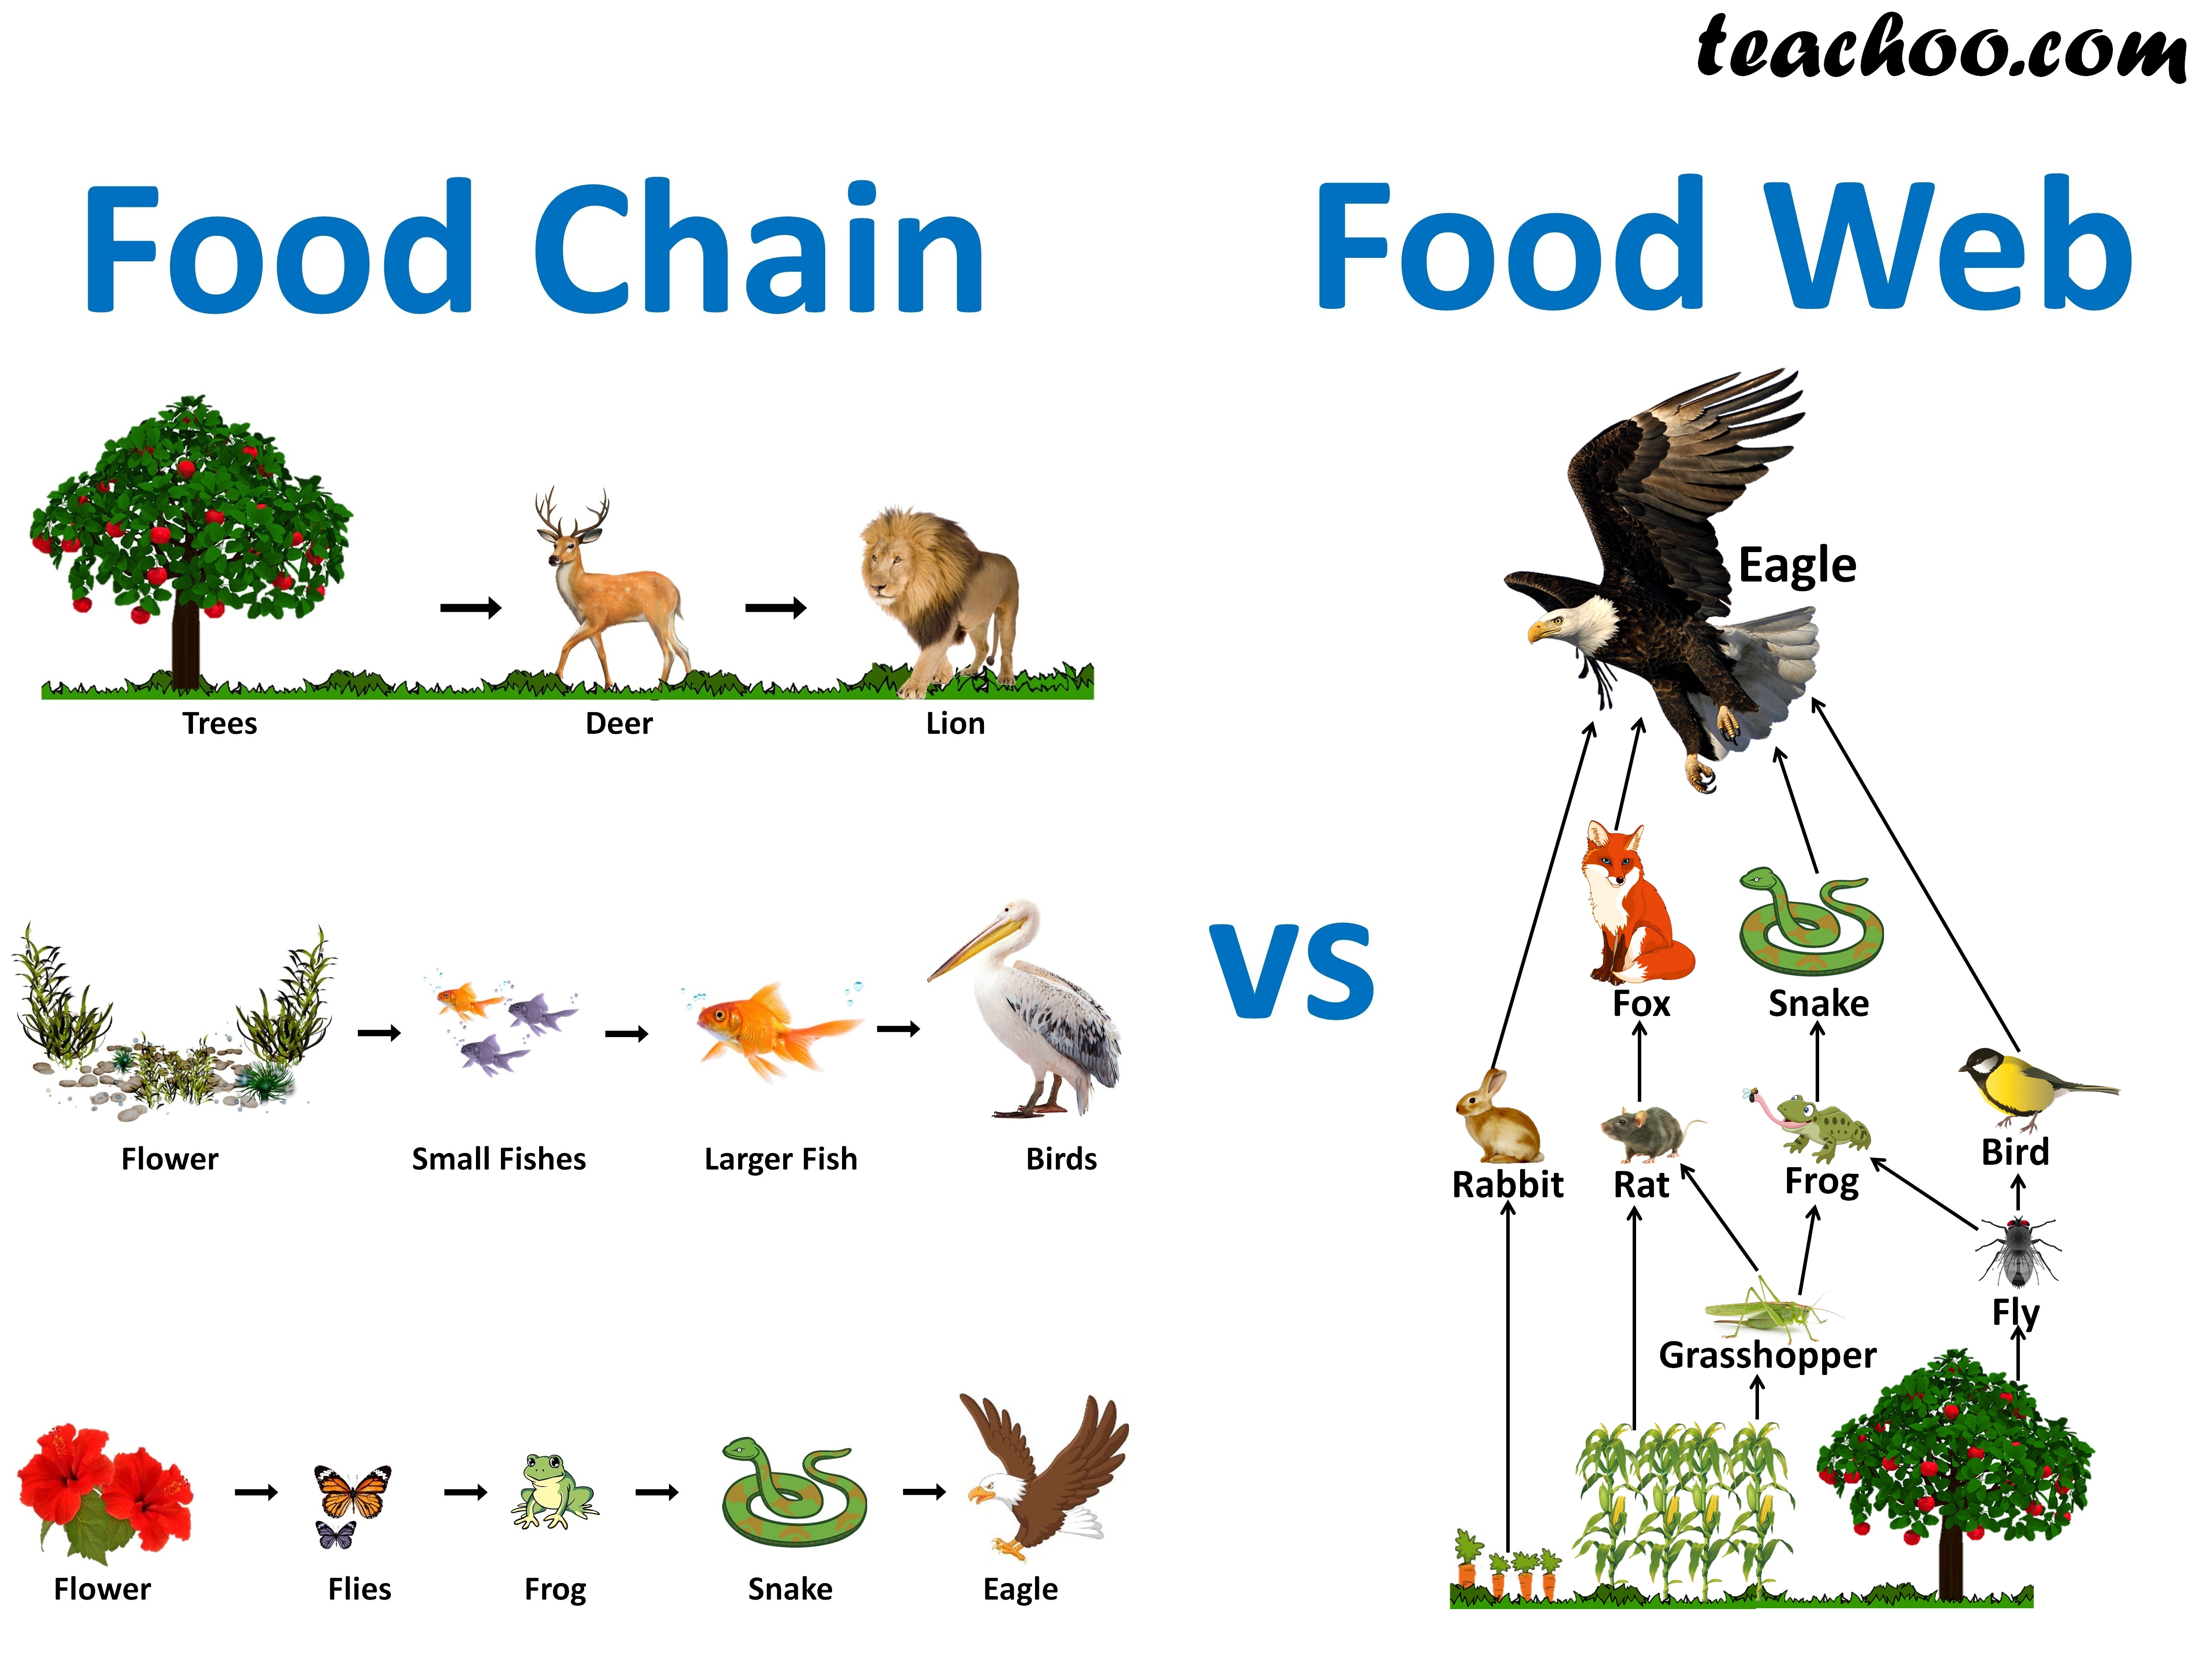 What is the difference between Food Chain and Food Web? - Teachoo